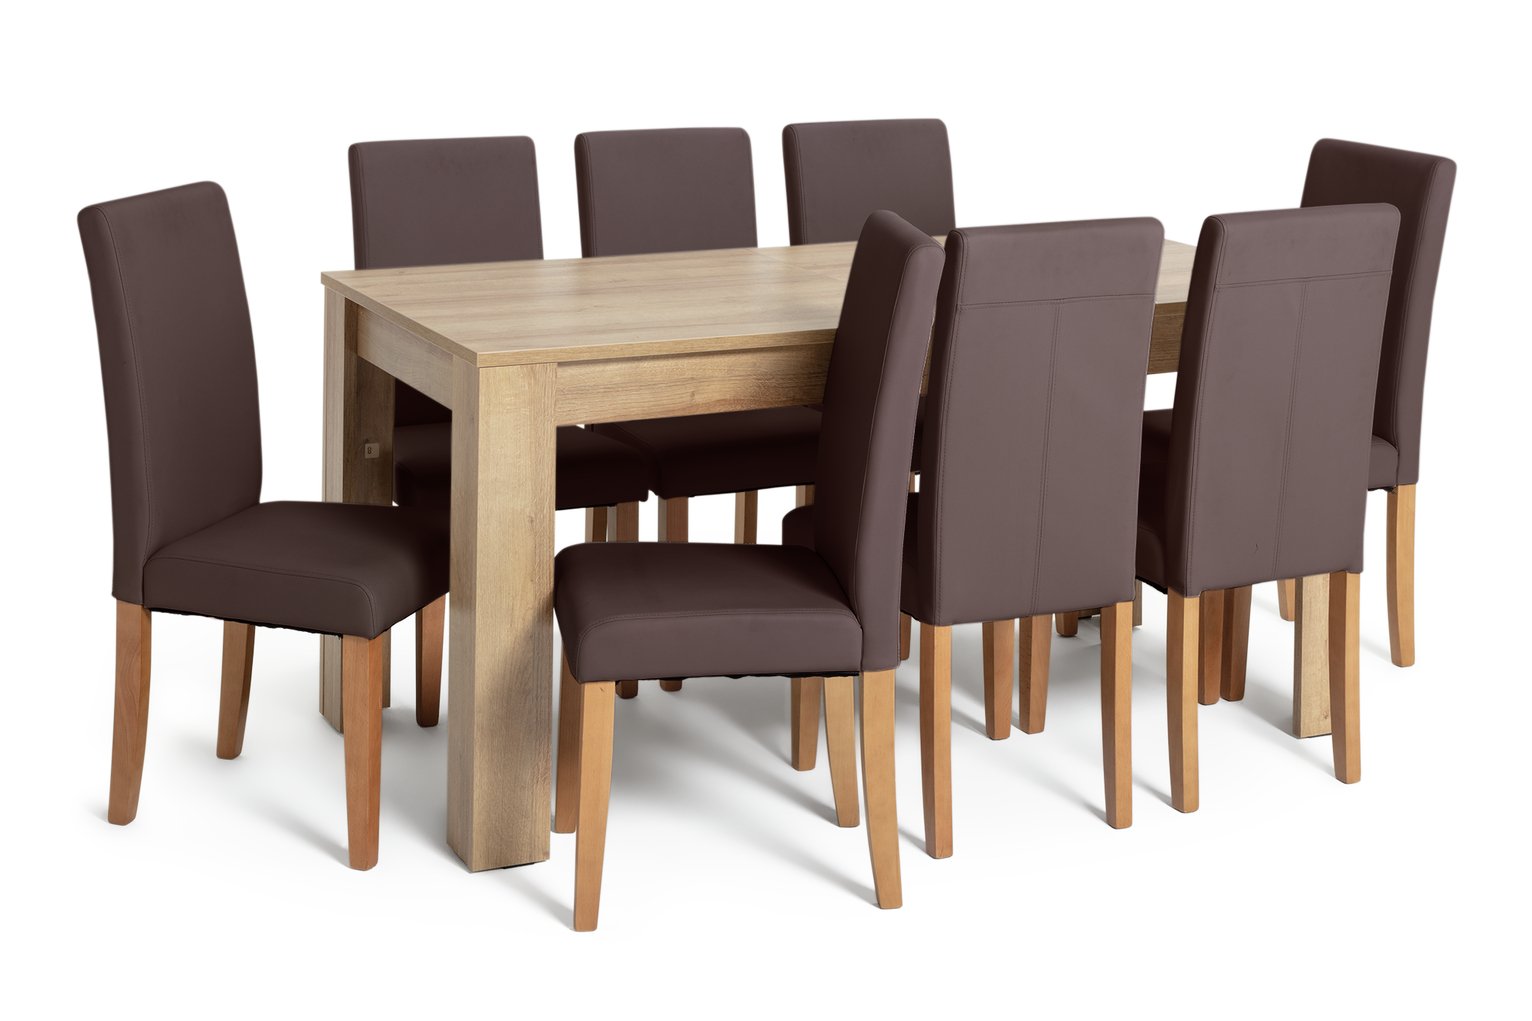 Extending Dining Tables At Argos - Buy Home Odell Ext Dining Table And